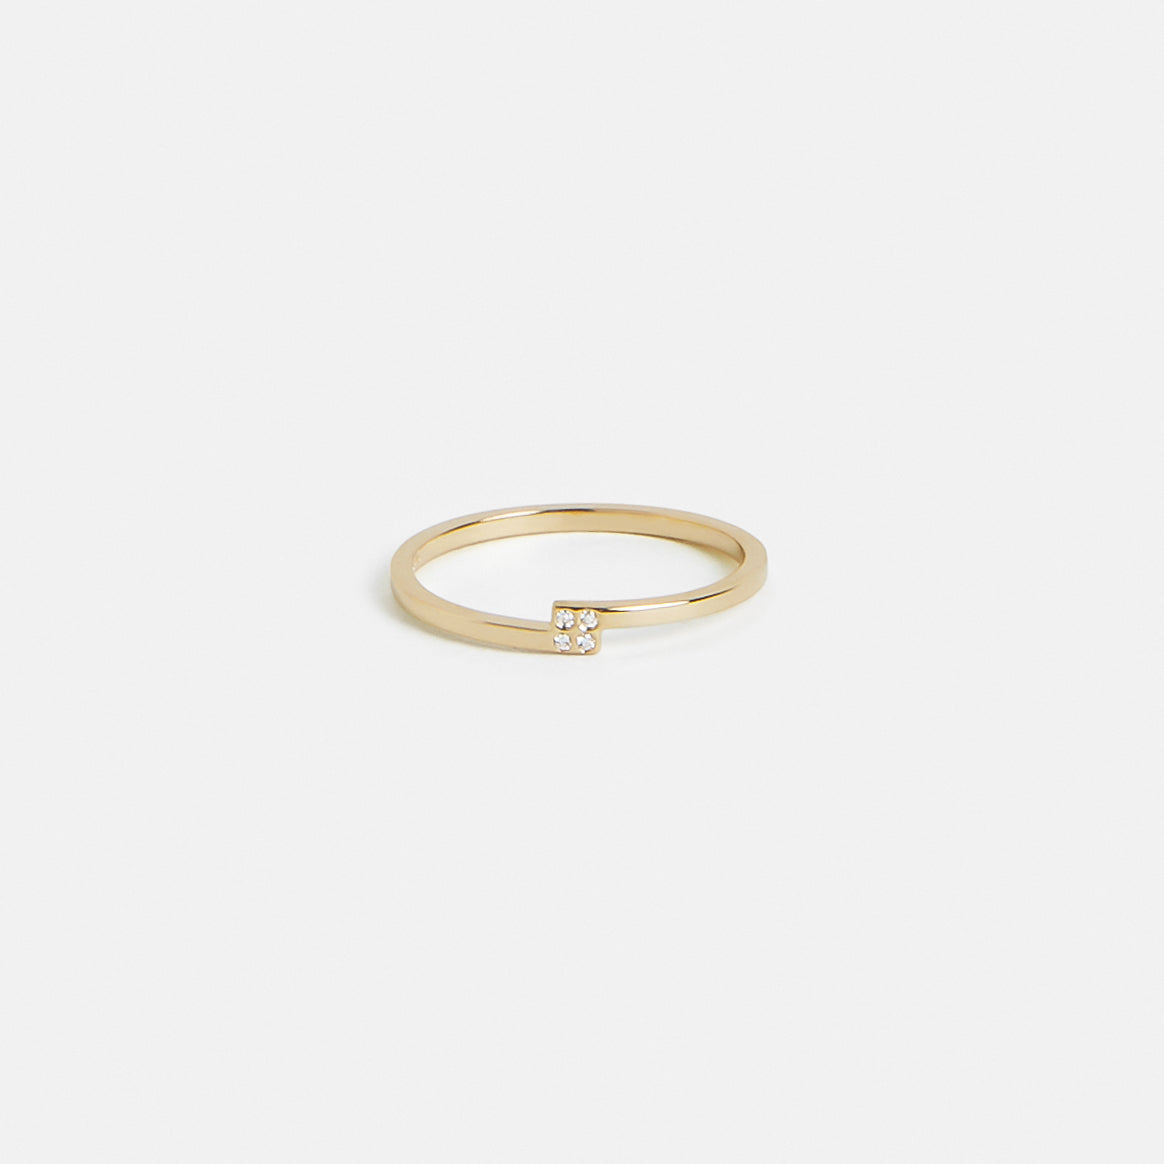 Piva Delicate Ring in 14k Gold set with White Diamonds By SHW Fine Jewelry NYC